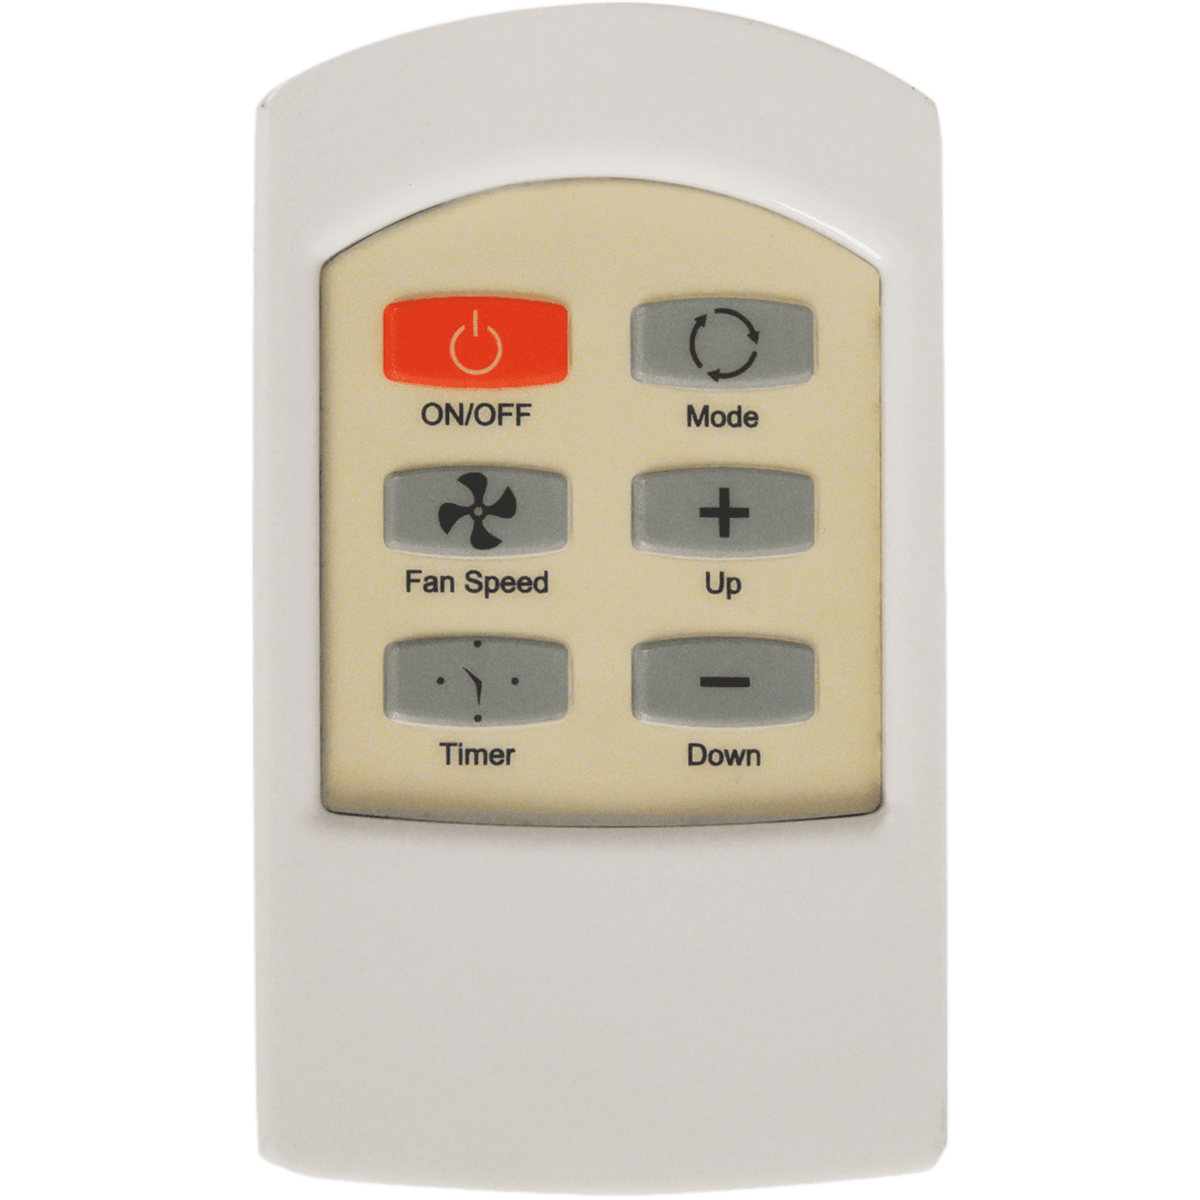 https://s3-assets.sylvane.com/media/images/products/honeywell-mf-series-remote-white.png